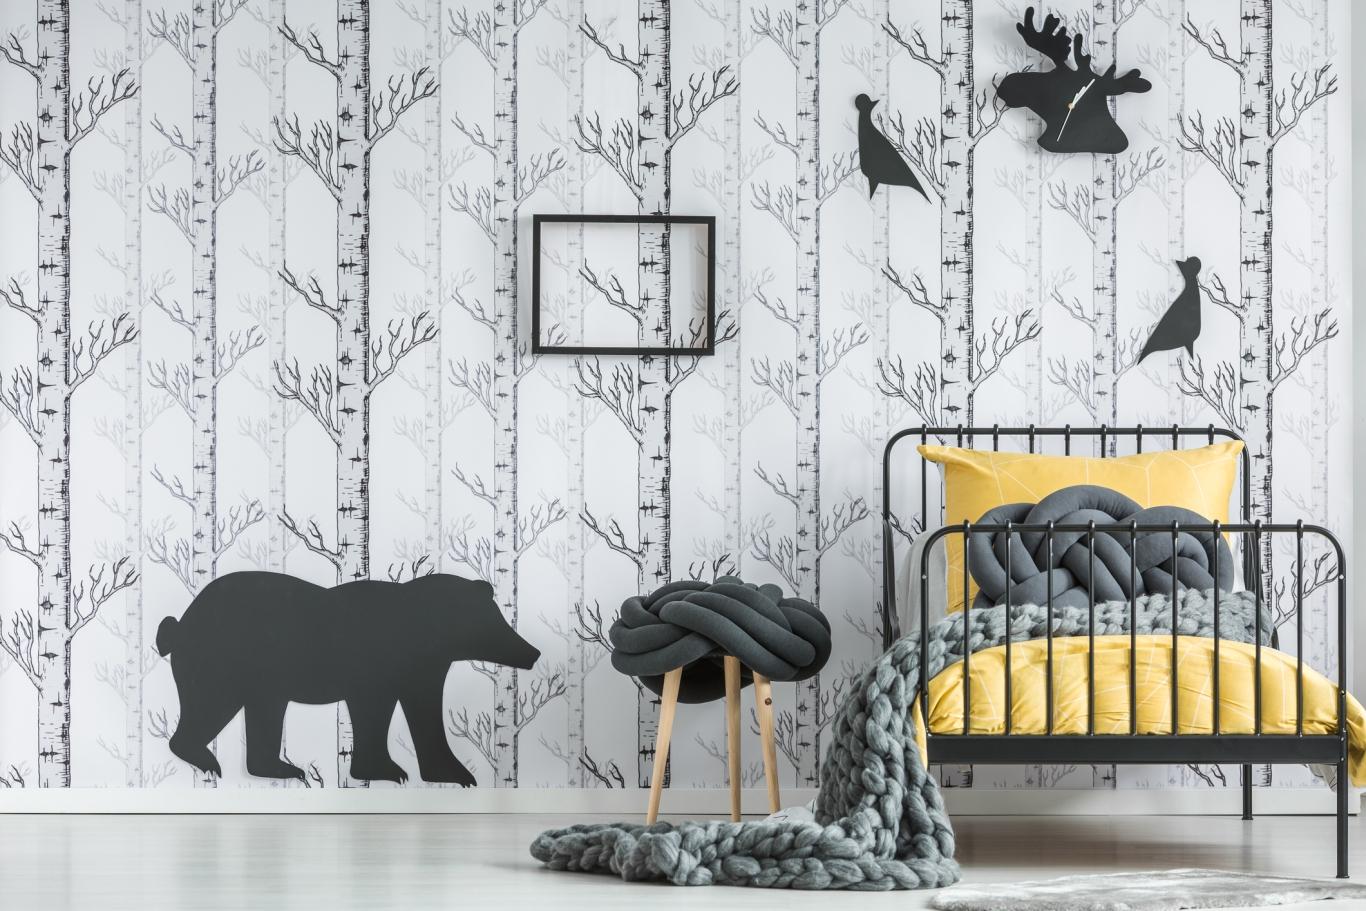 Shadow decals of animals on a decorative wall. 